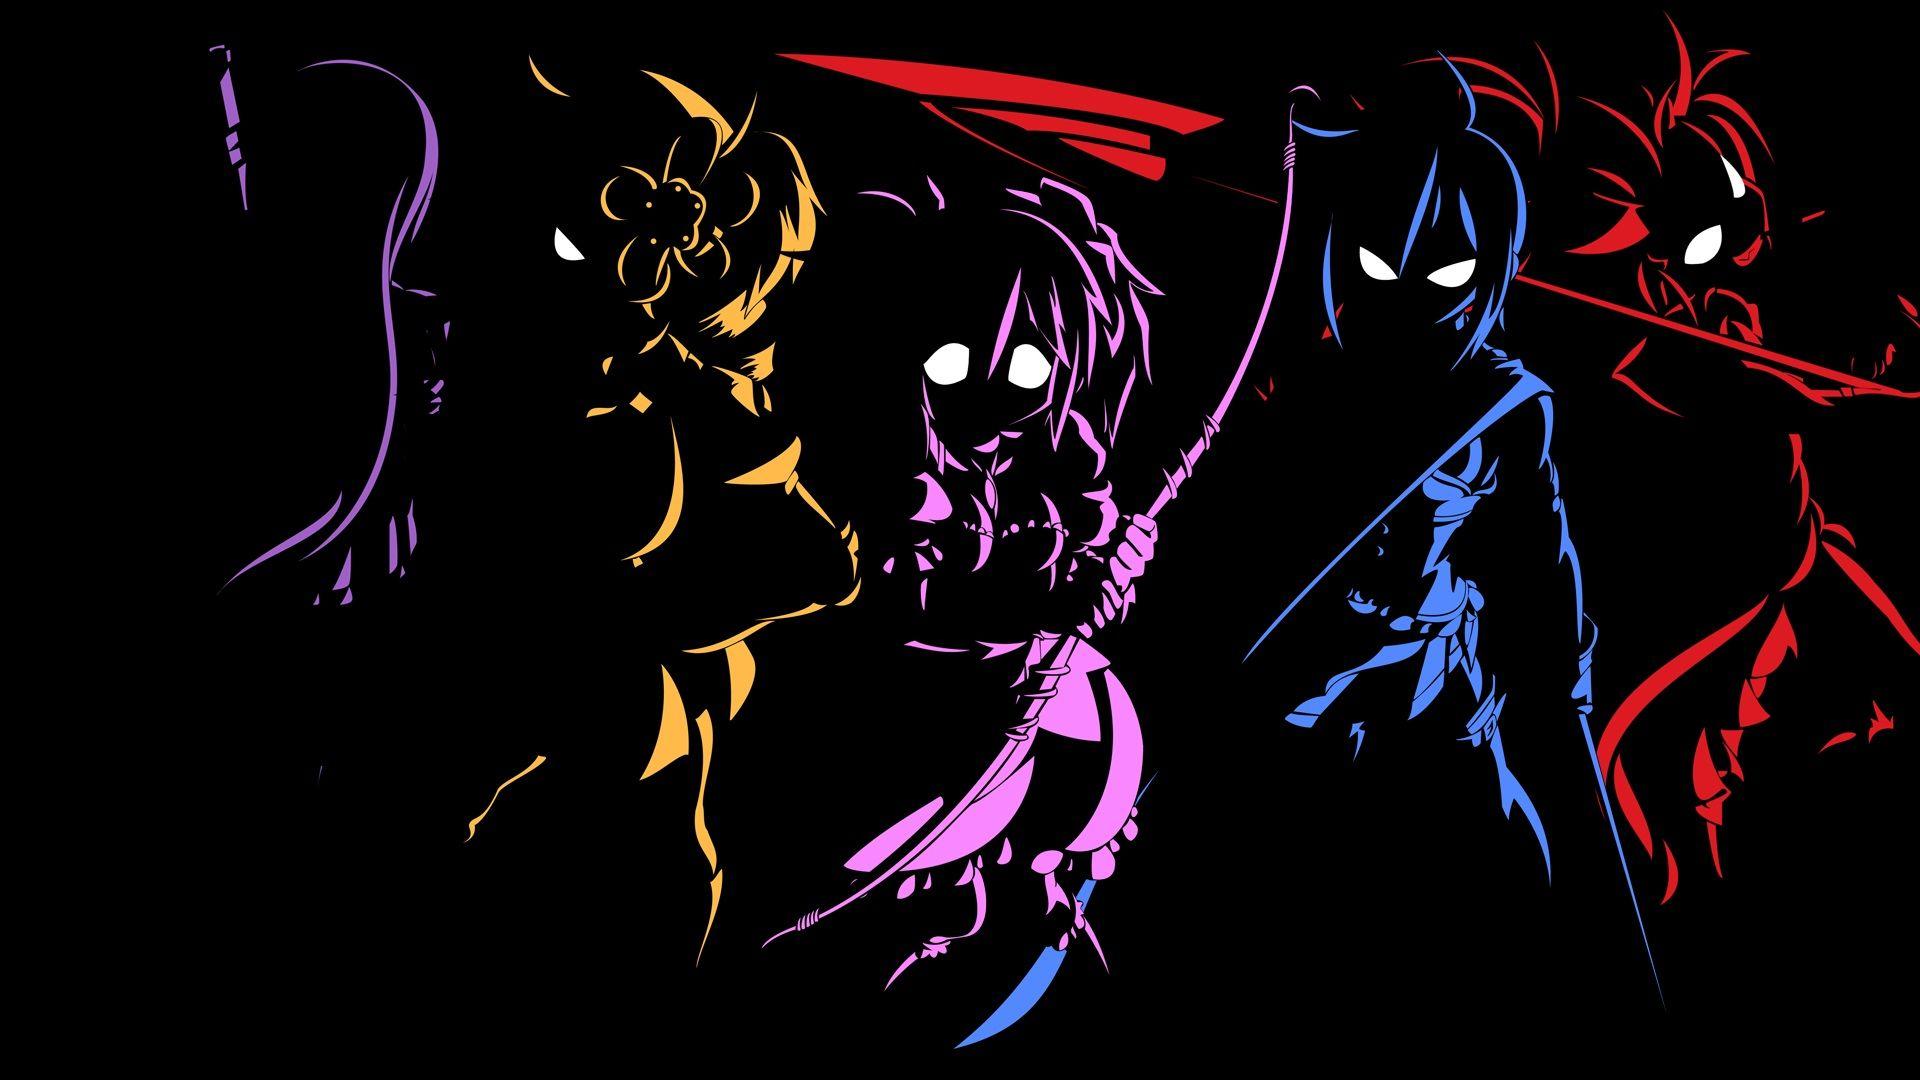 Anime Characters Outline Black Wallpaper. Cool anime wallpaper